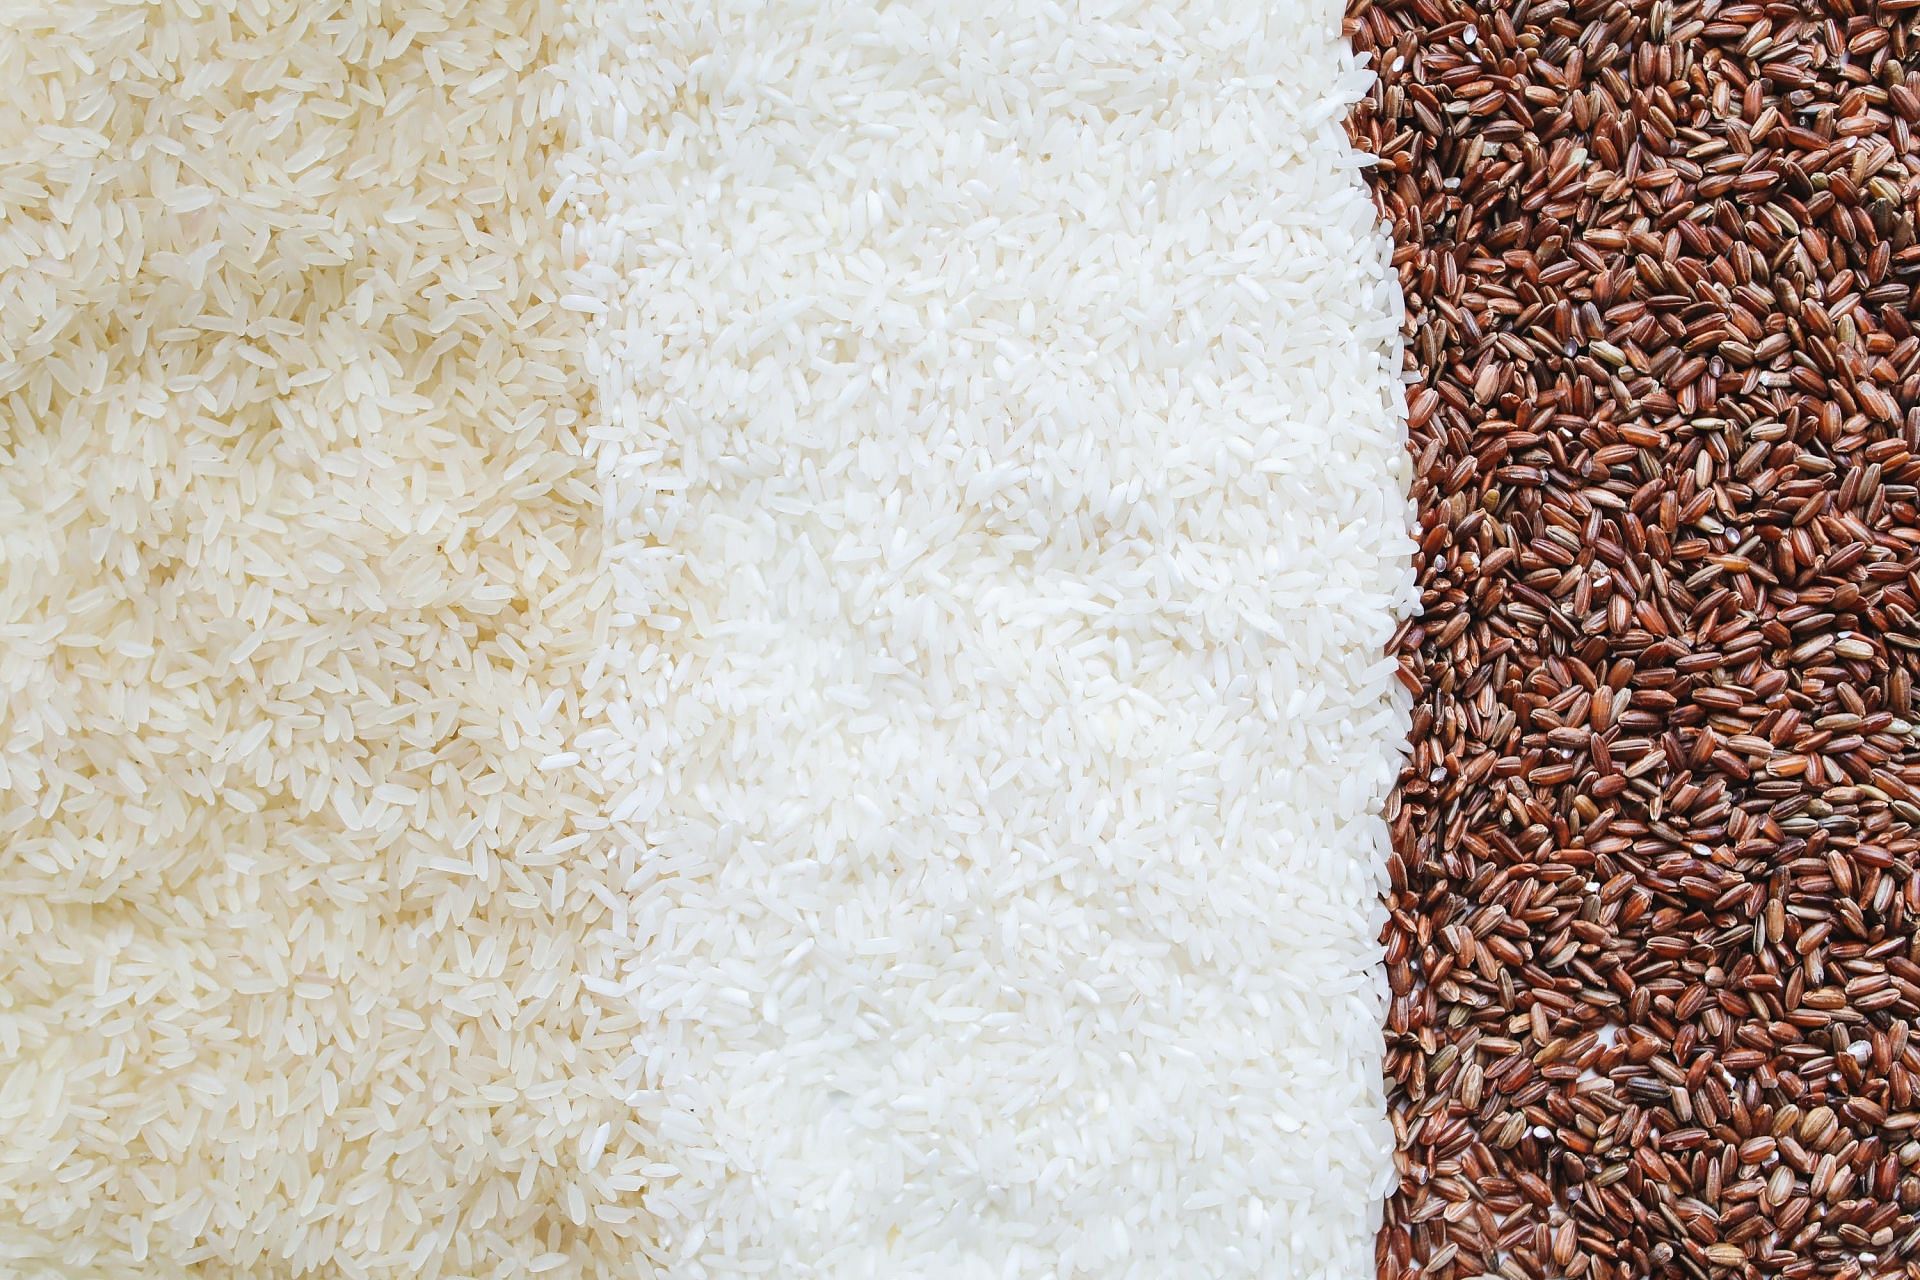 Top rice hack to lose weight(image sourced via Pexels / Photo by Freestocksrg)